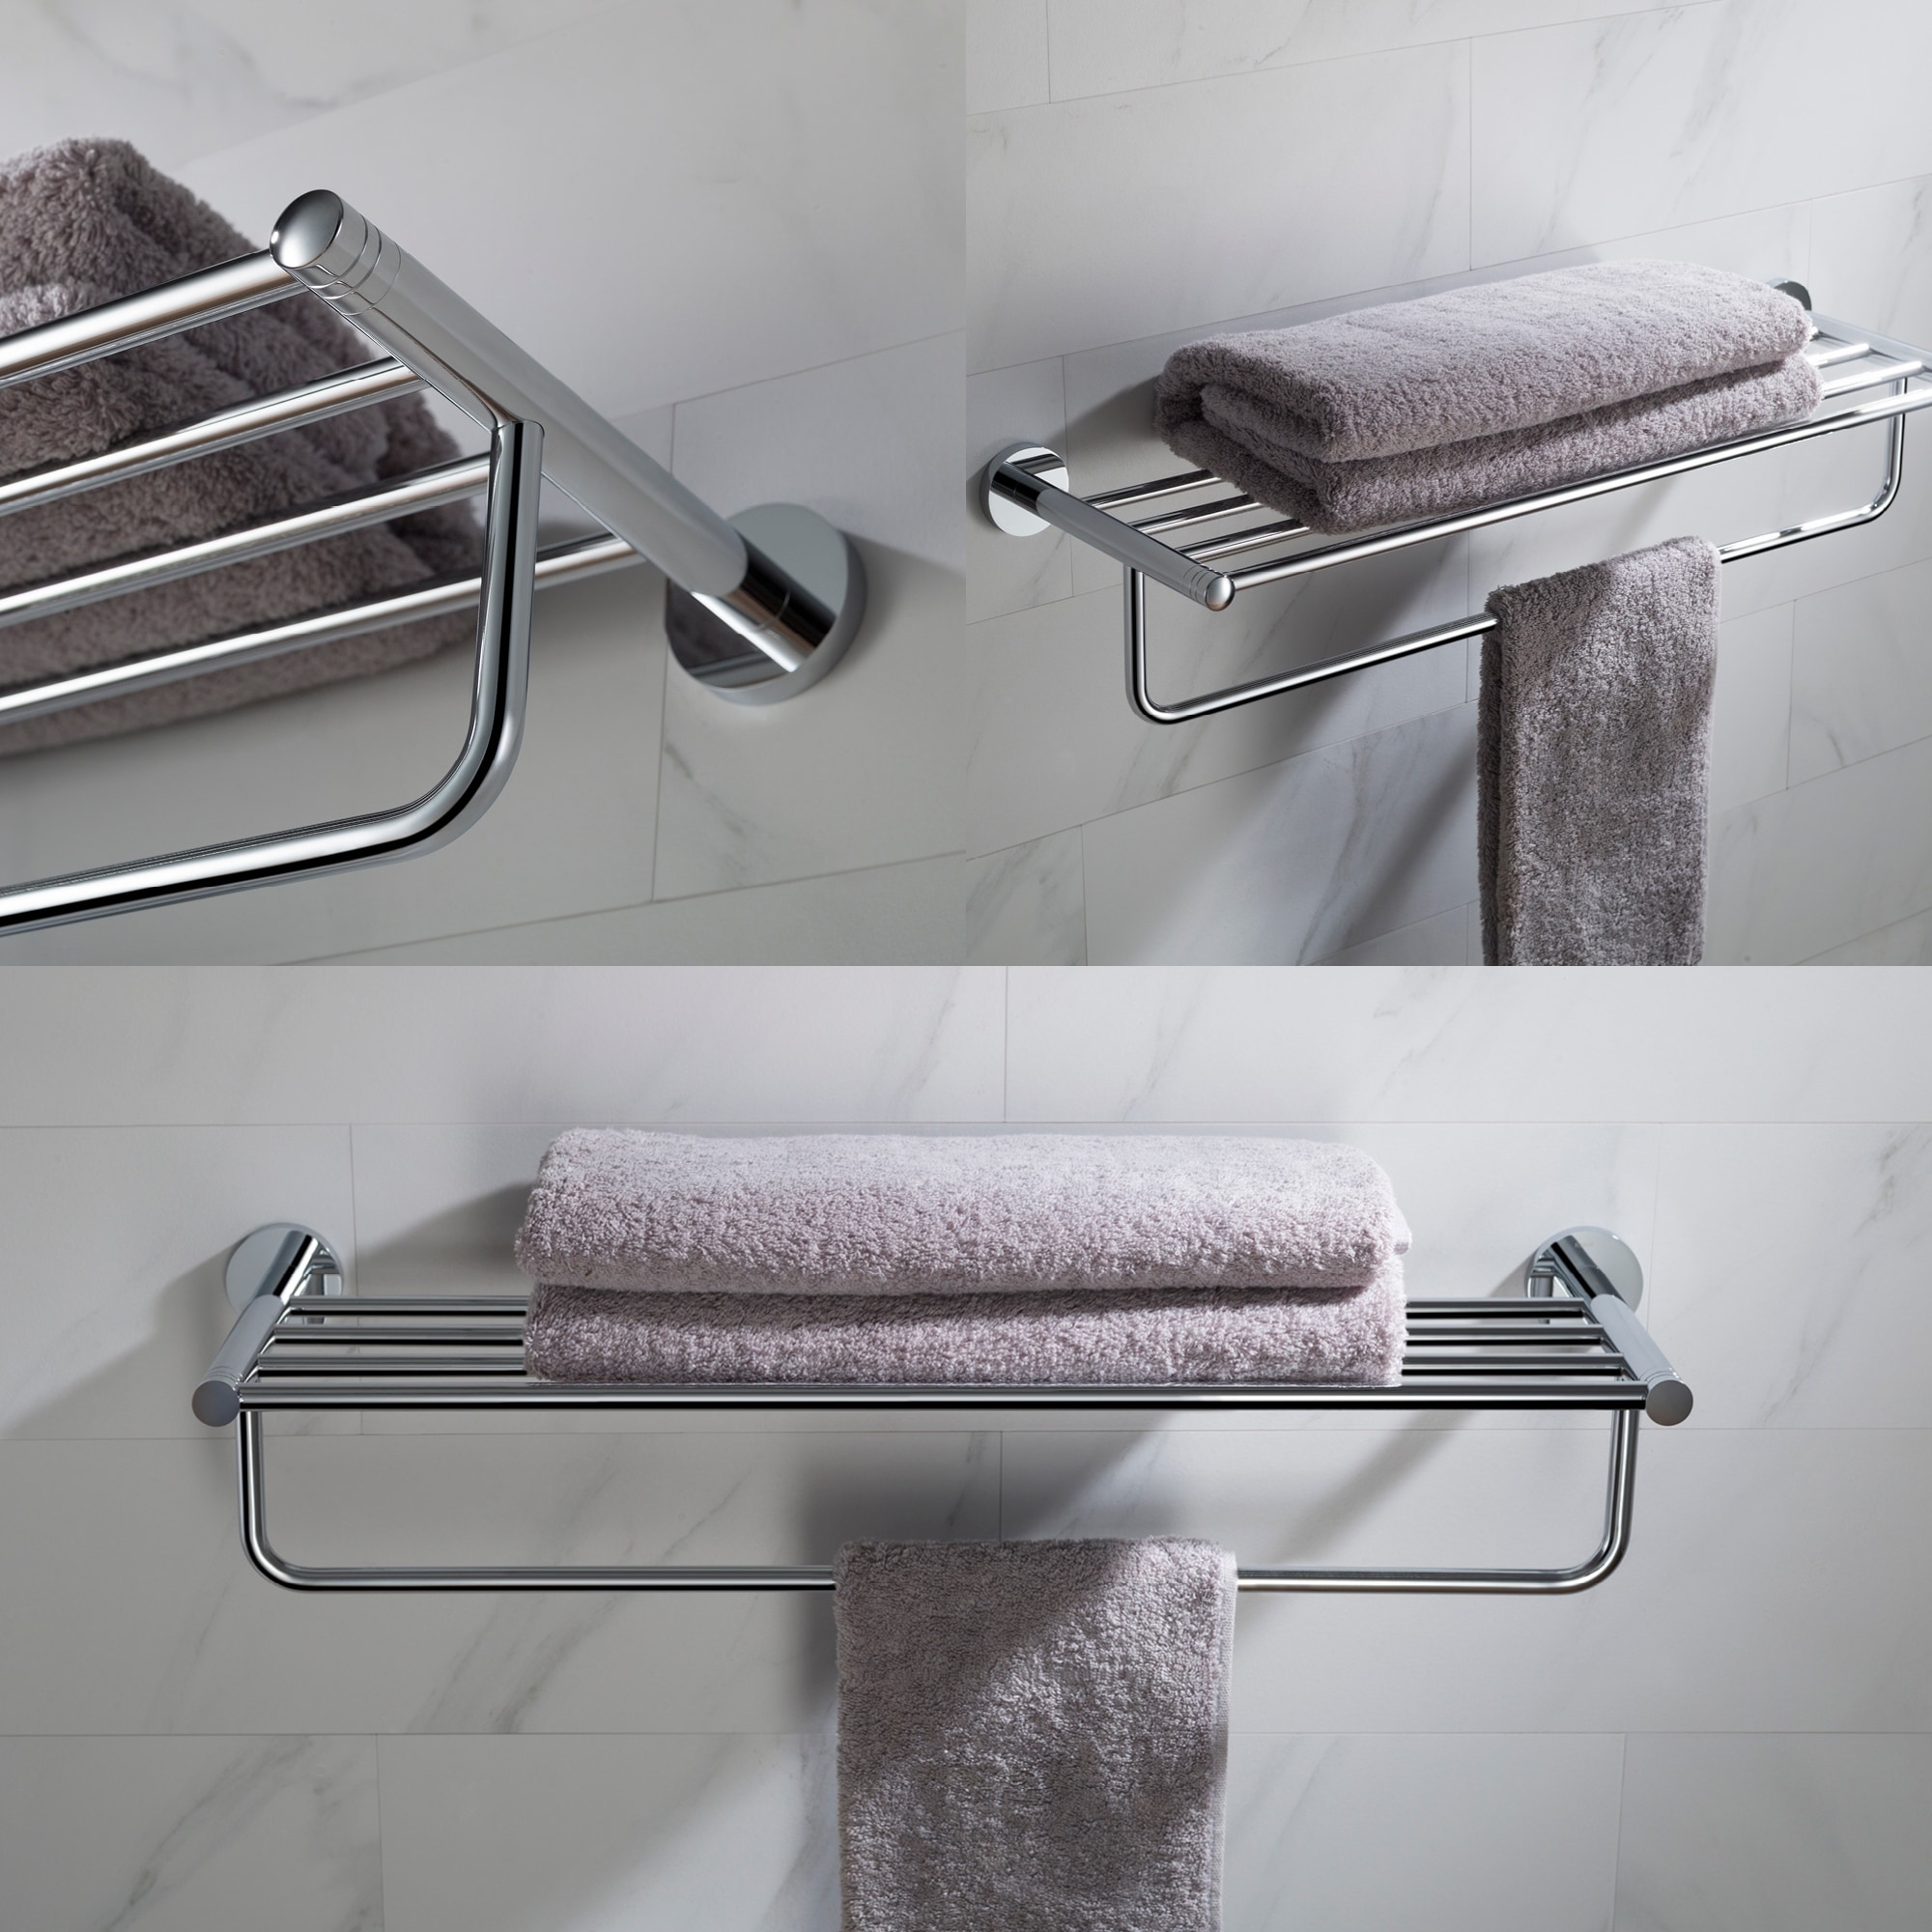 Top Product Reviews for KRAUS Elie Bathroom Shelf with Towel Bar 24267225  Bed Bath  Beyond